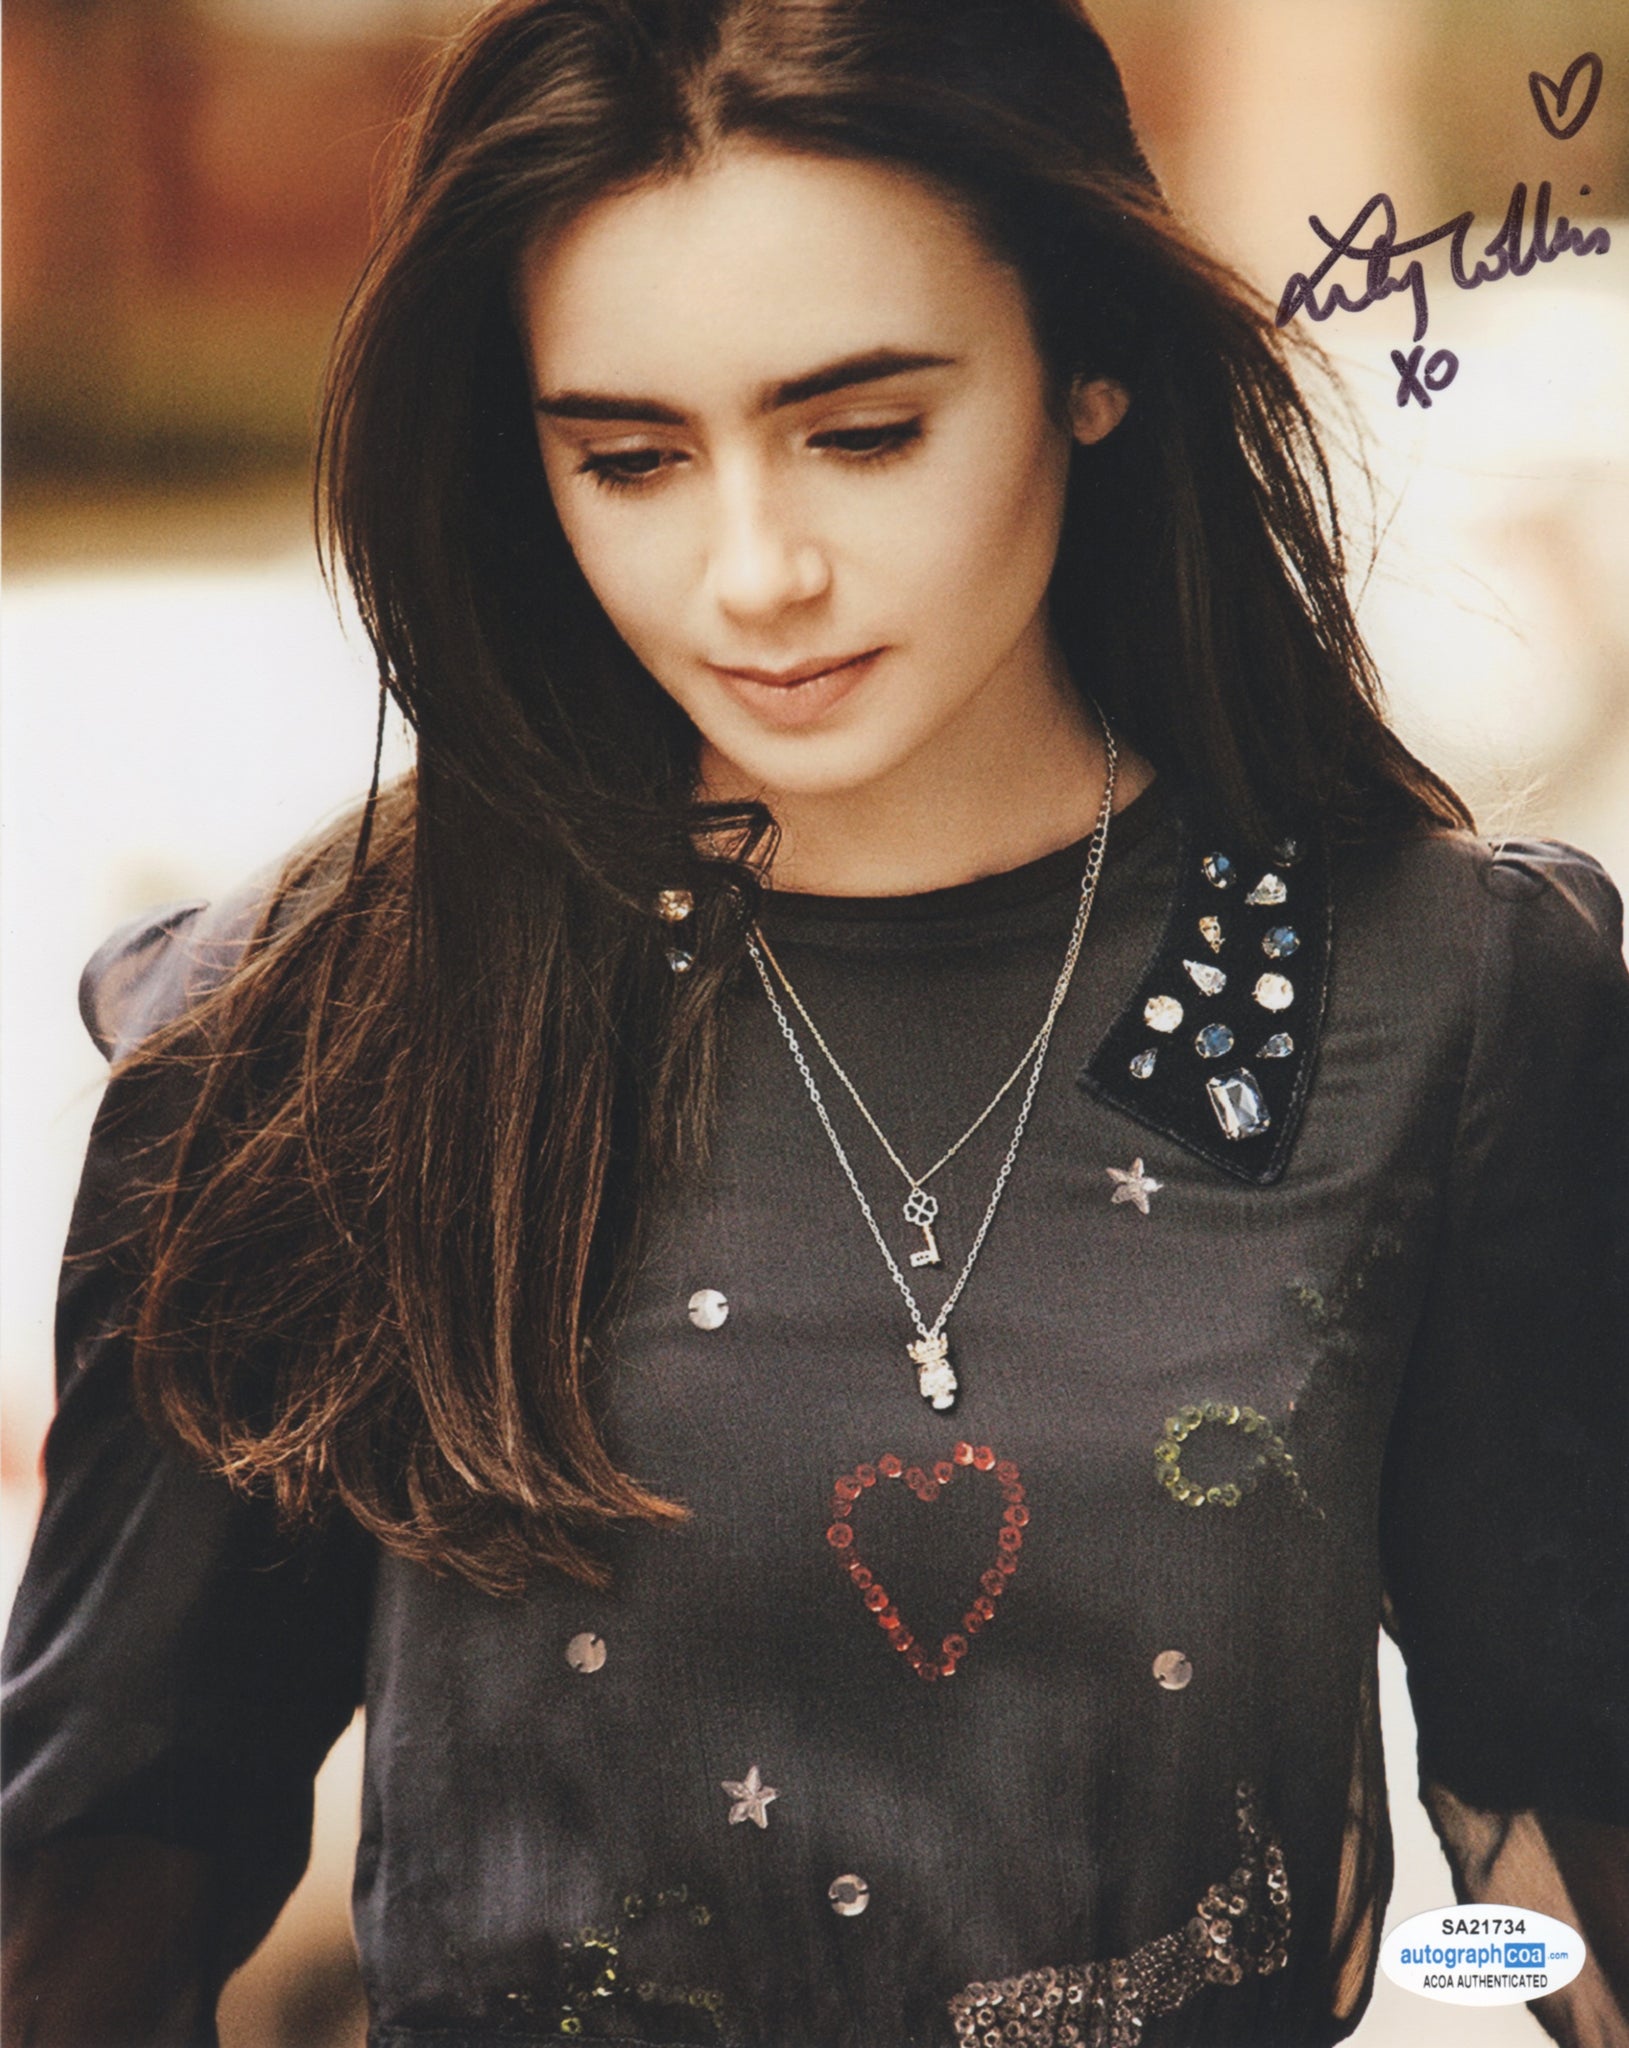 Lily Collins Sexy Signed Autograph 8x10 Photo ACOA #7 - Outlaw Hobbies Authentic Autographs